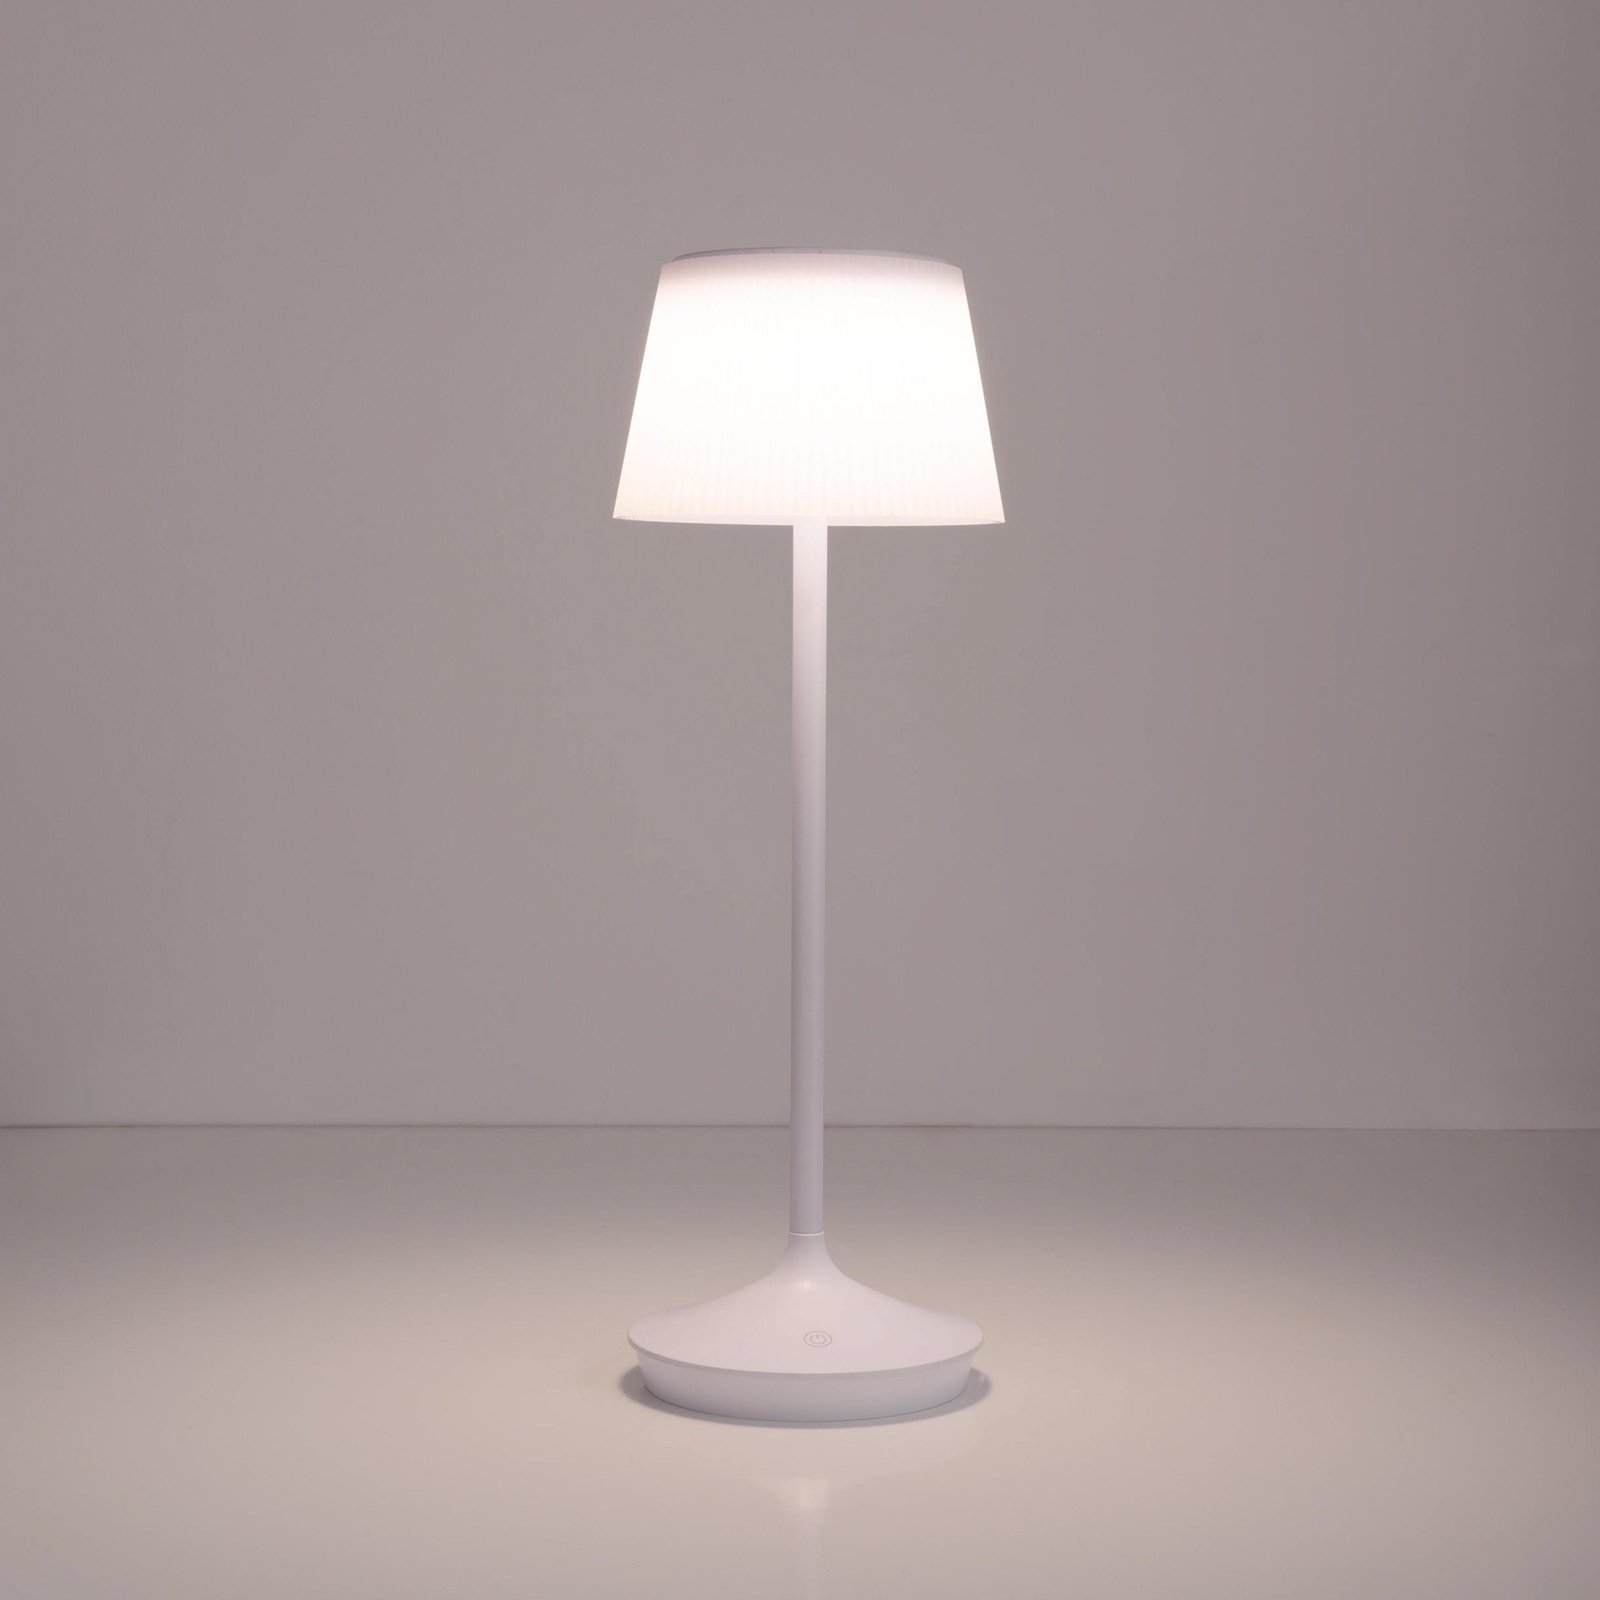 Lampe table solaire LED Emmi CCT recharge, blanche